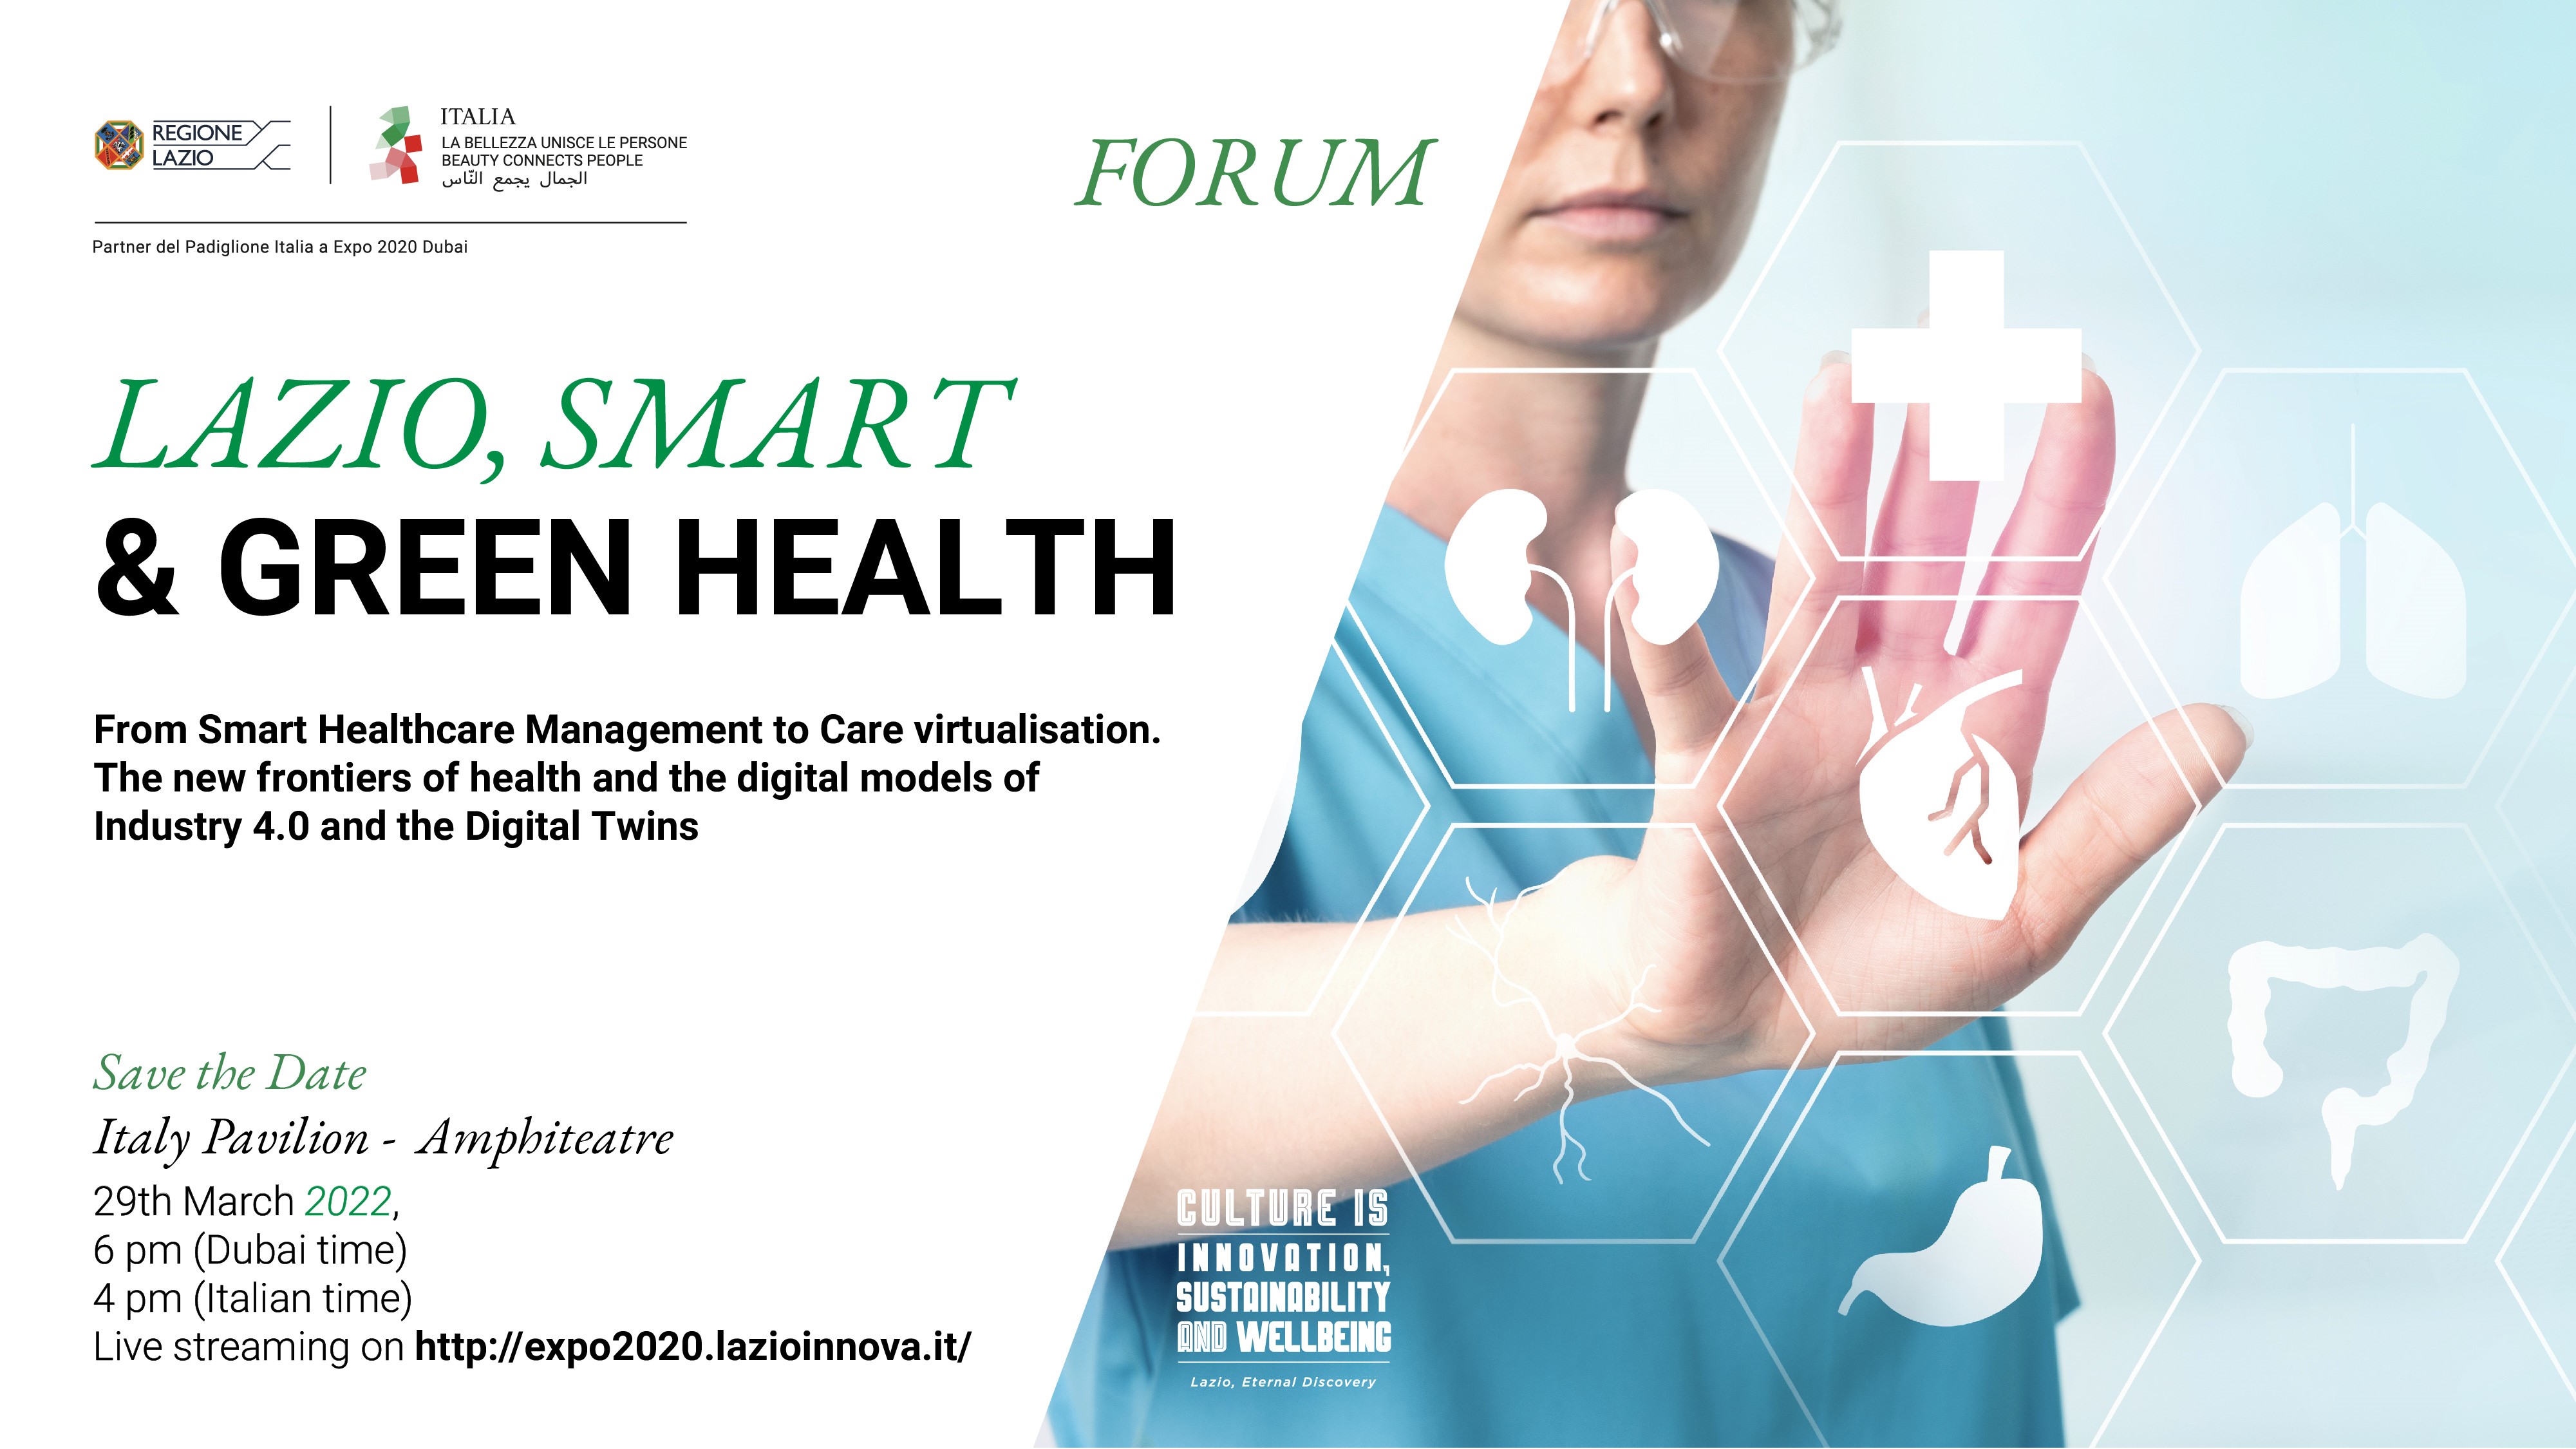 Lazio, Smart & Green Health. From smart healthcare management to the virtualisation of care. The new frontiers of health and the digital models of Industry 4.0 and Digital Twin